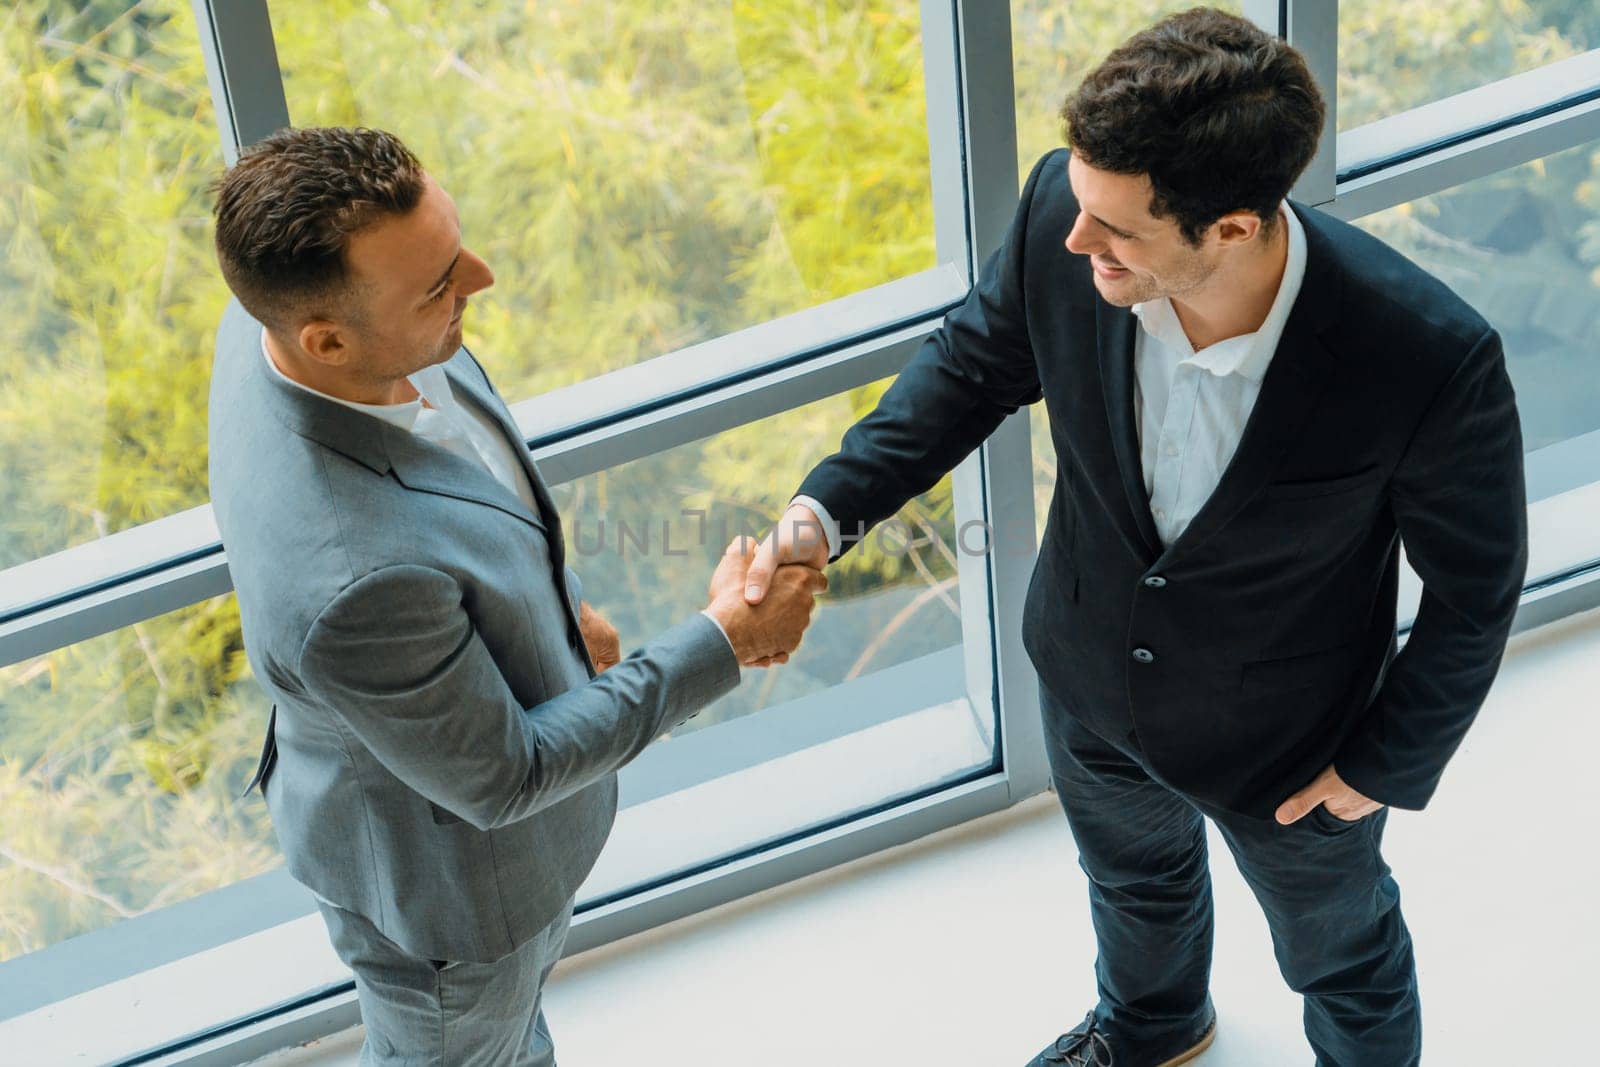 Businessman handshake with another businessman partner in modern workplace office. People corporate business deals concept. uds